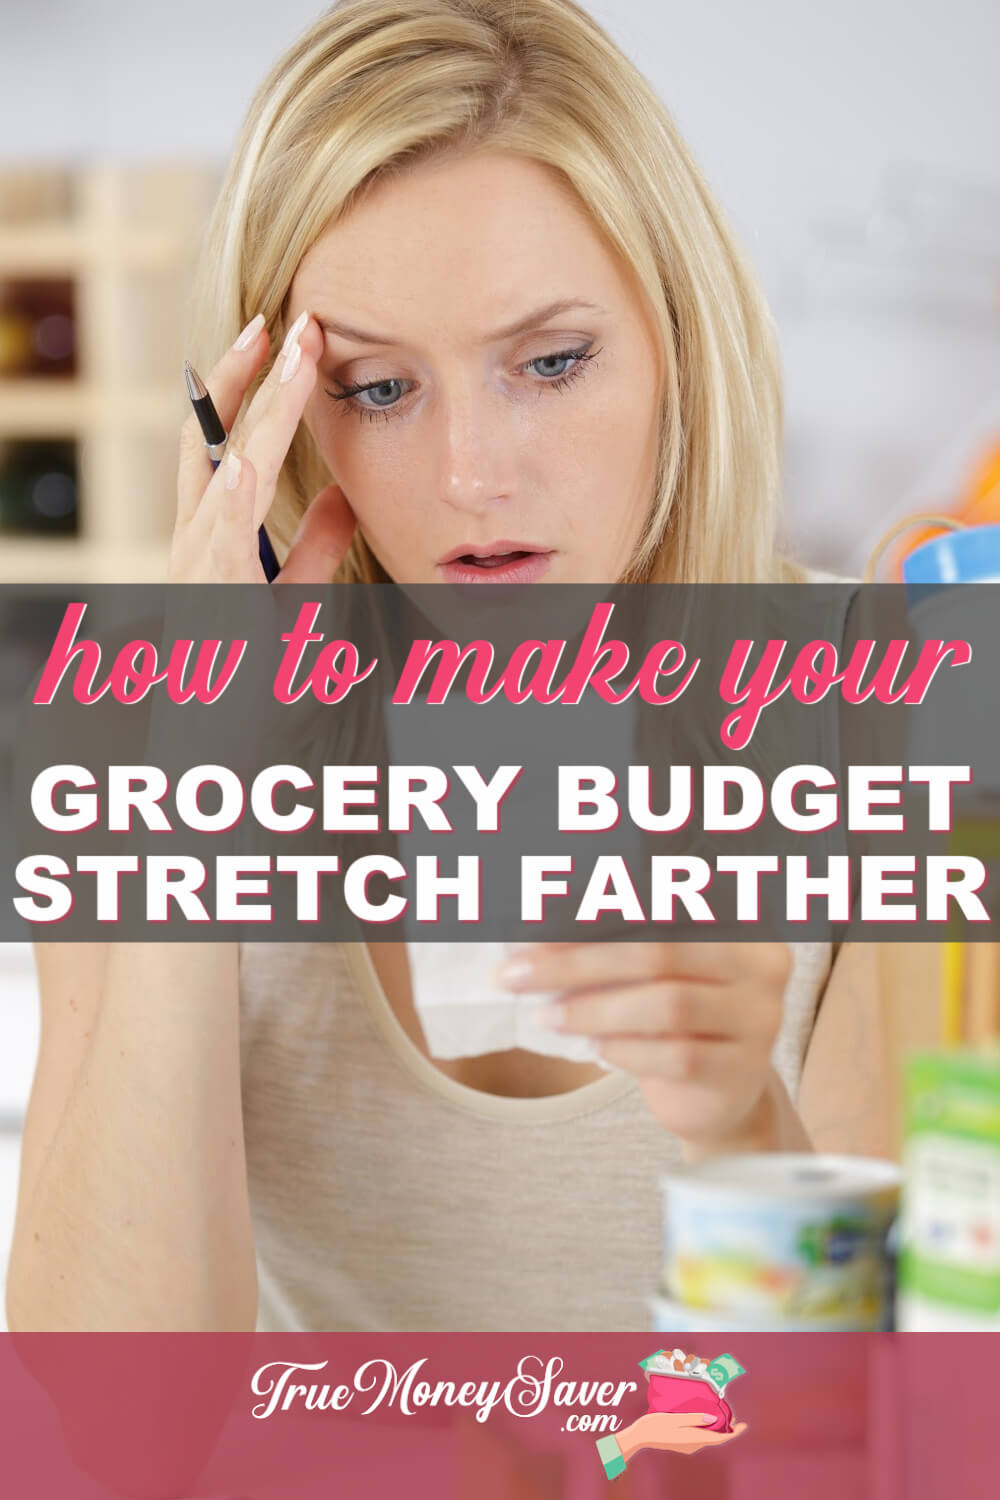 How To Make Your Spending Freeze Budget for Groceries Stretch